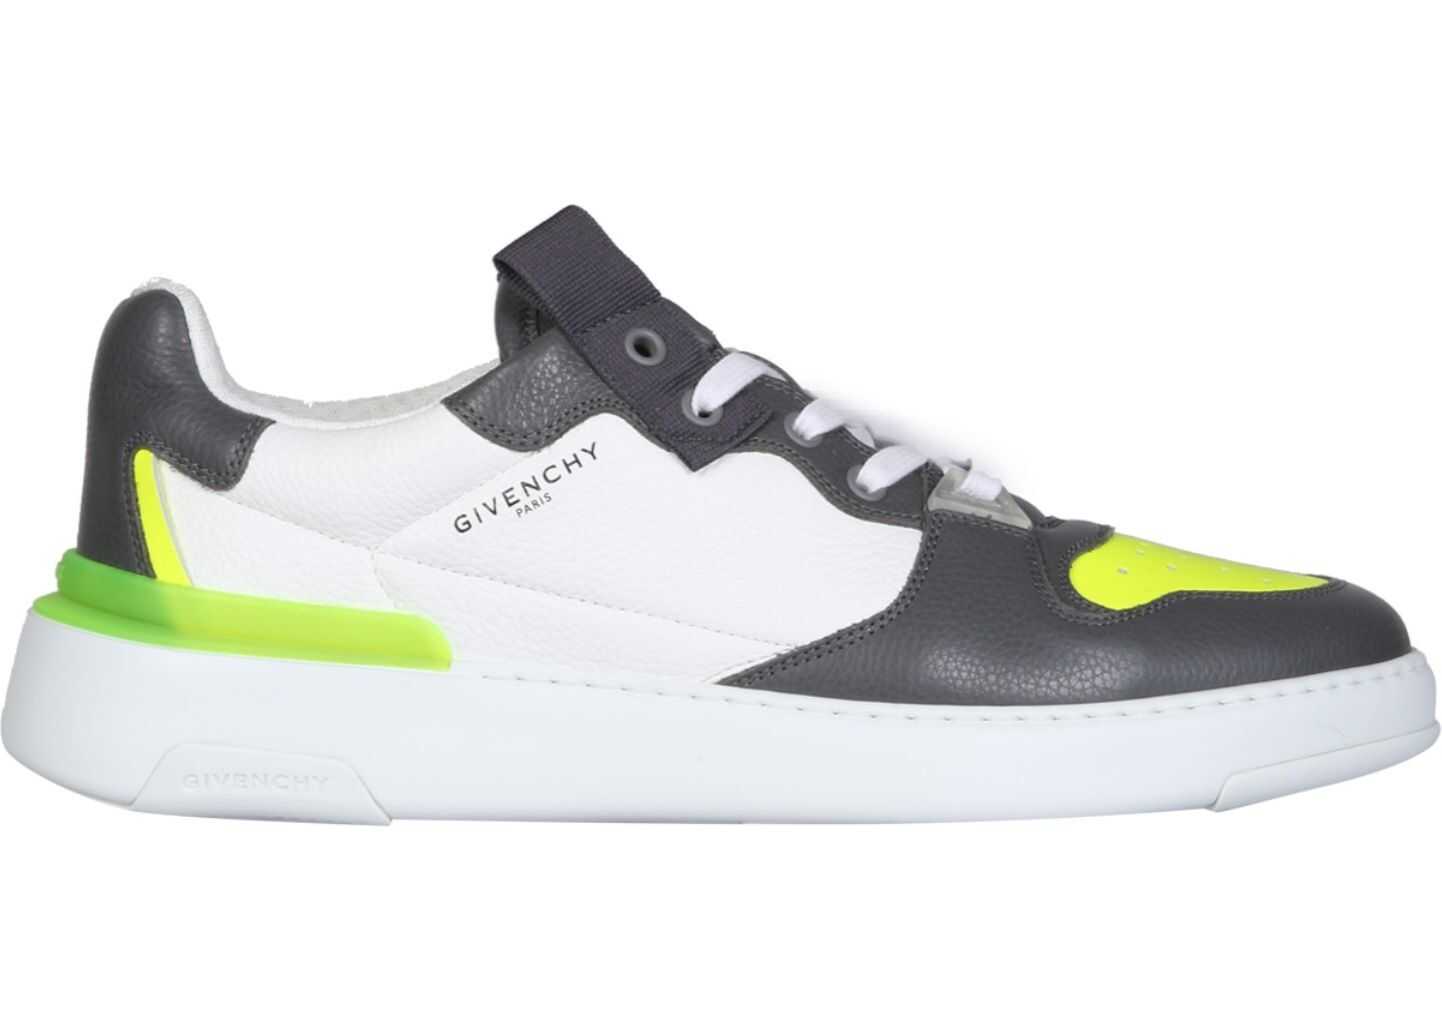 Givenchy Wing Low Sneakers BH002KH0SN_069 GREY